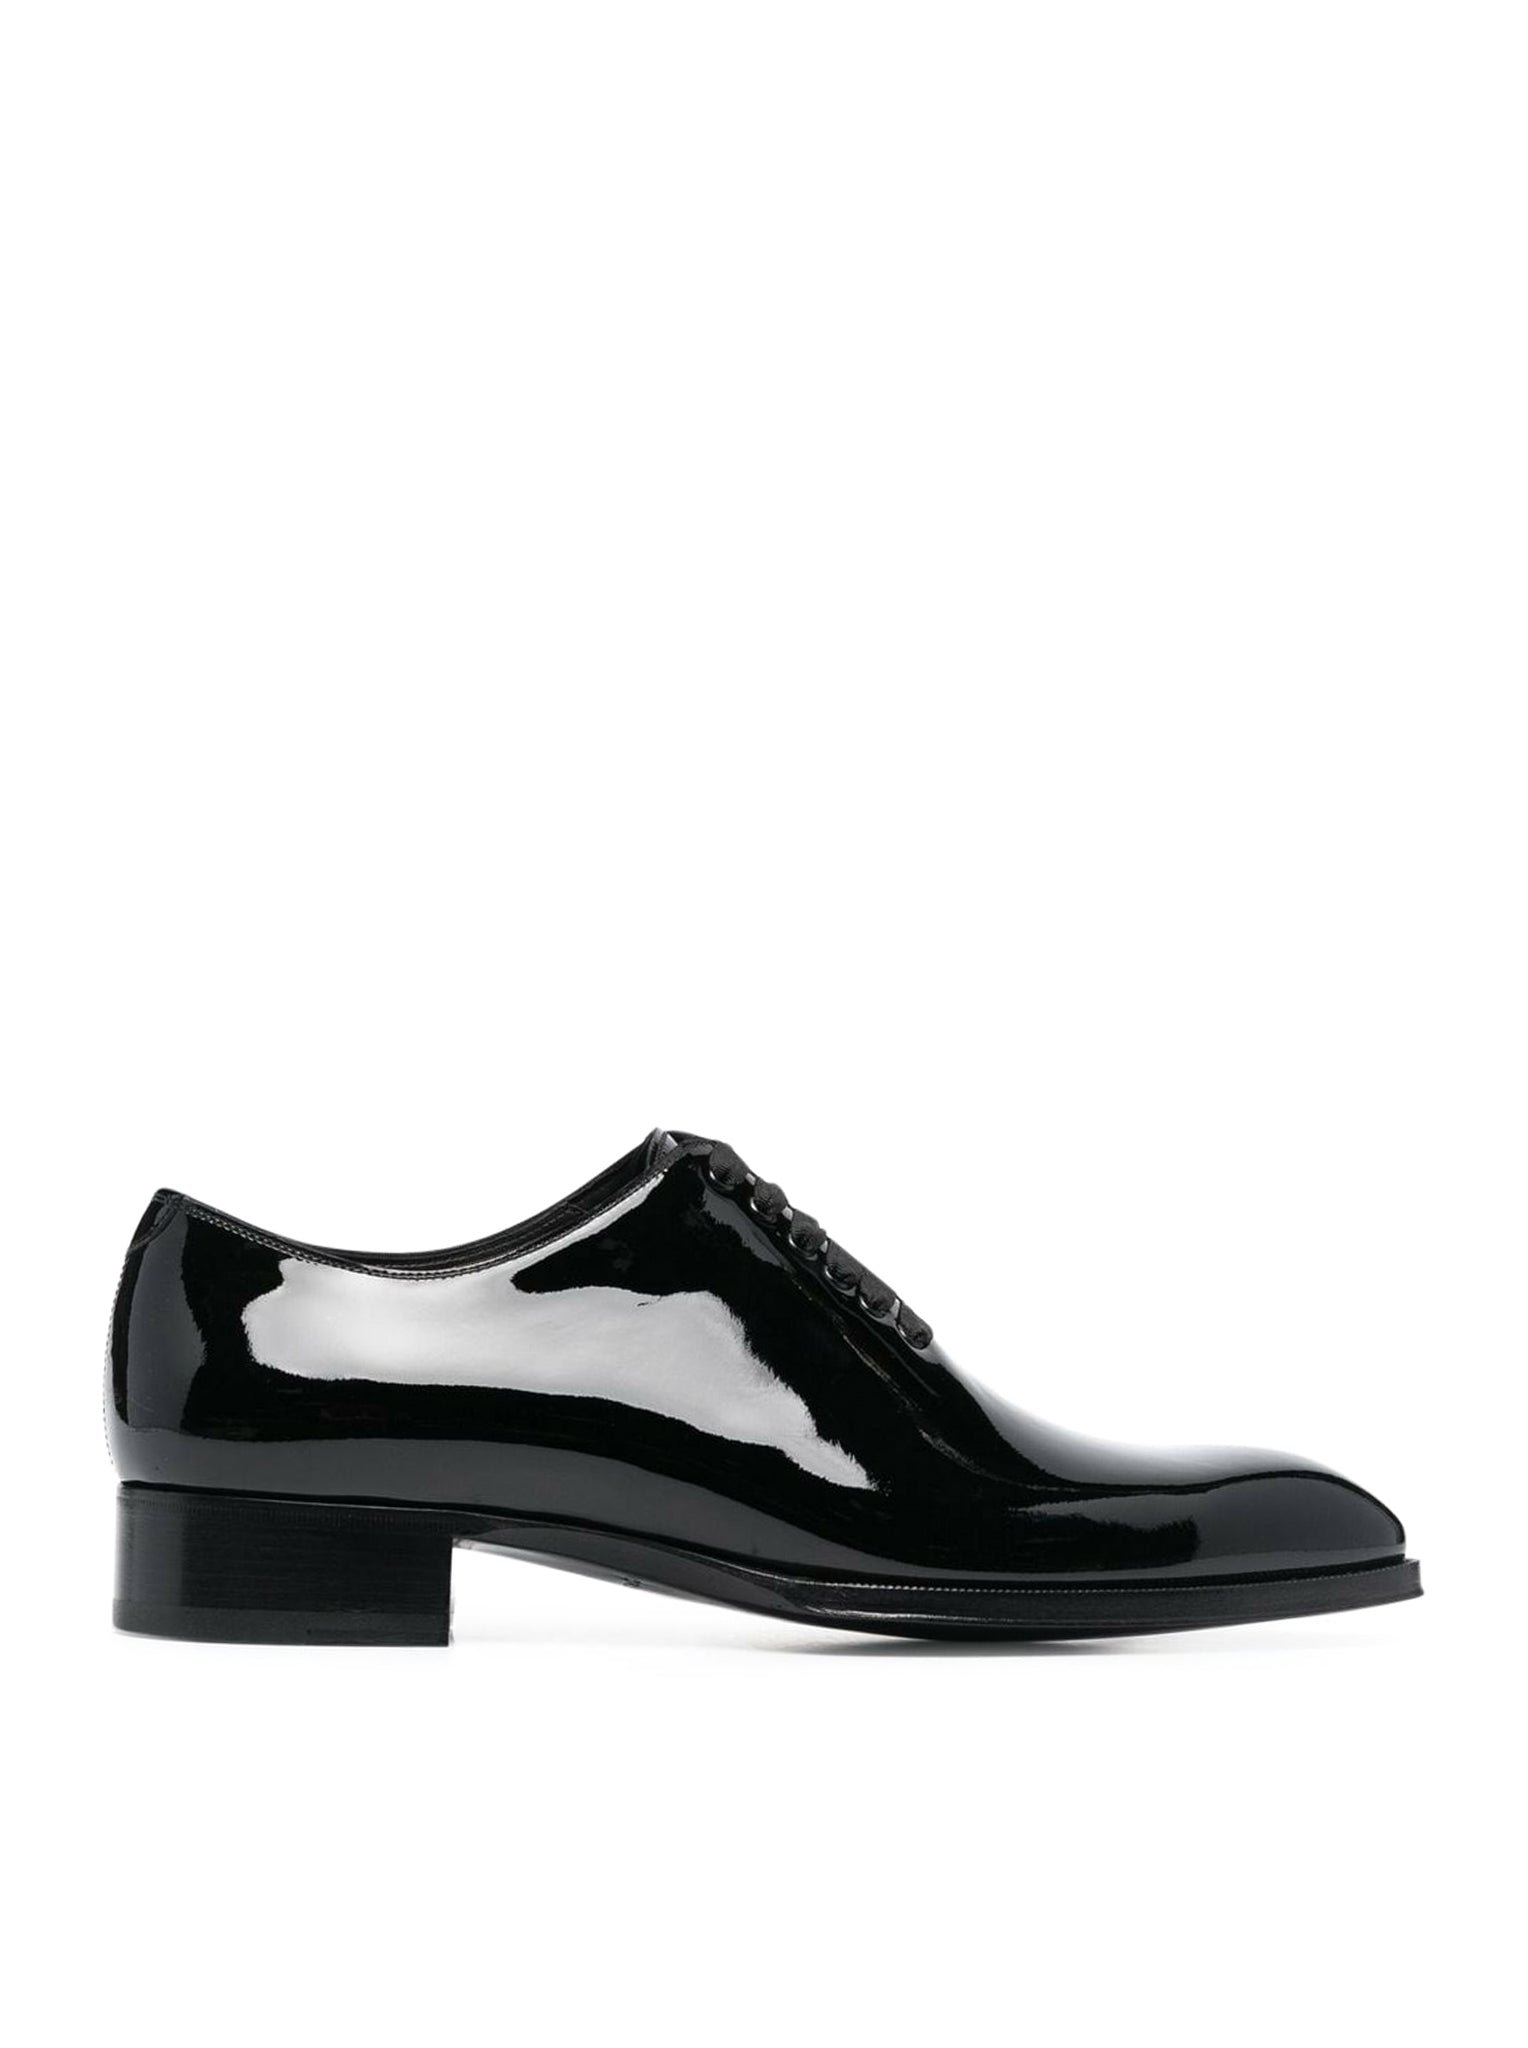 patent-finish oxford shoes